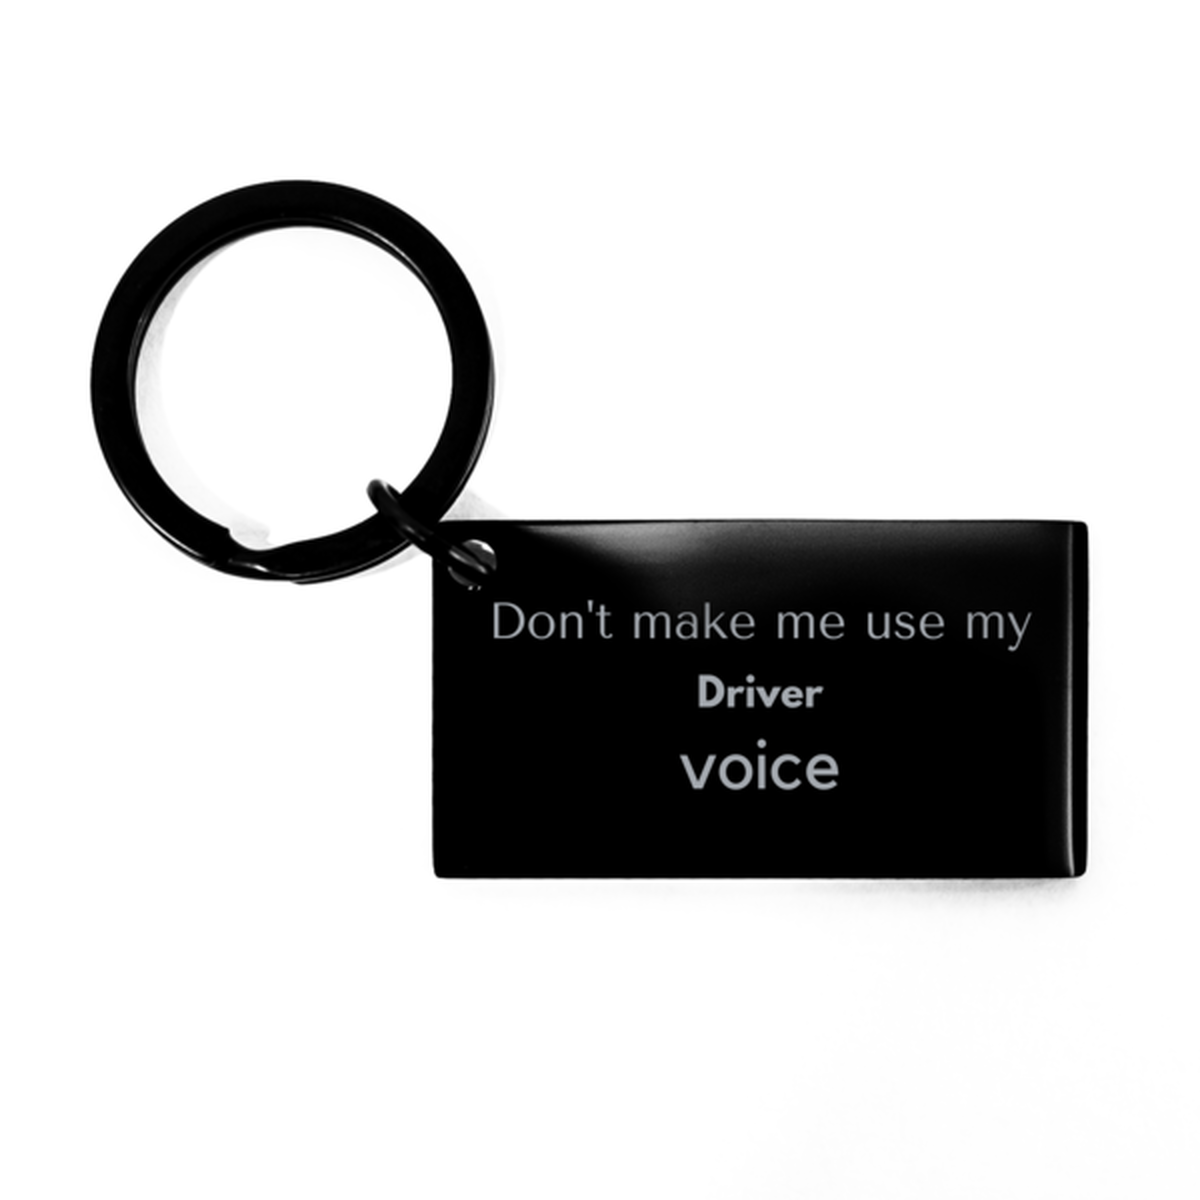 Don't make me use my Driver voice, Sarcasm Driver Gifts, Christmas Driver Keychain Birthday Unique Gifts For Driver Coworkers, Men, Women, Colleague, Friends